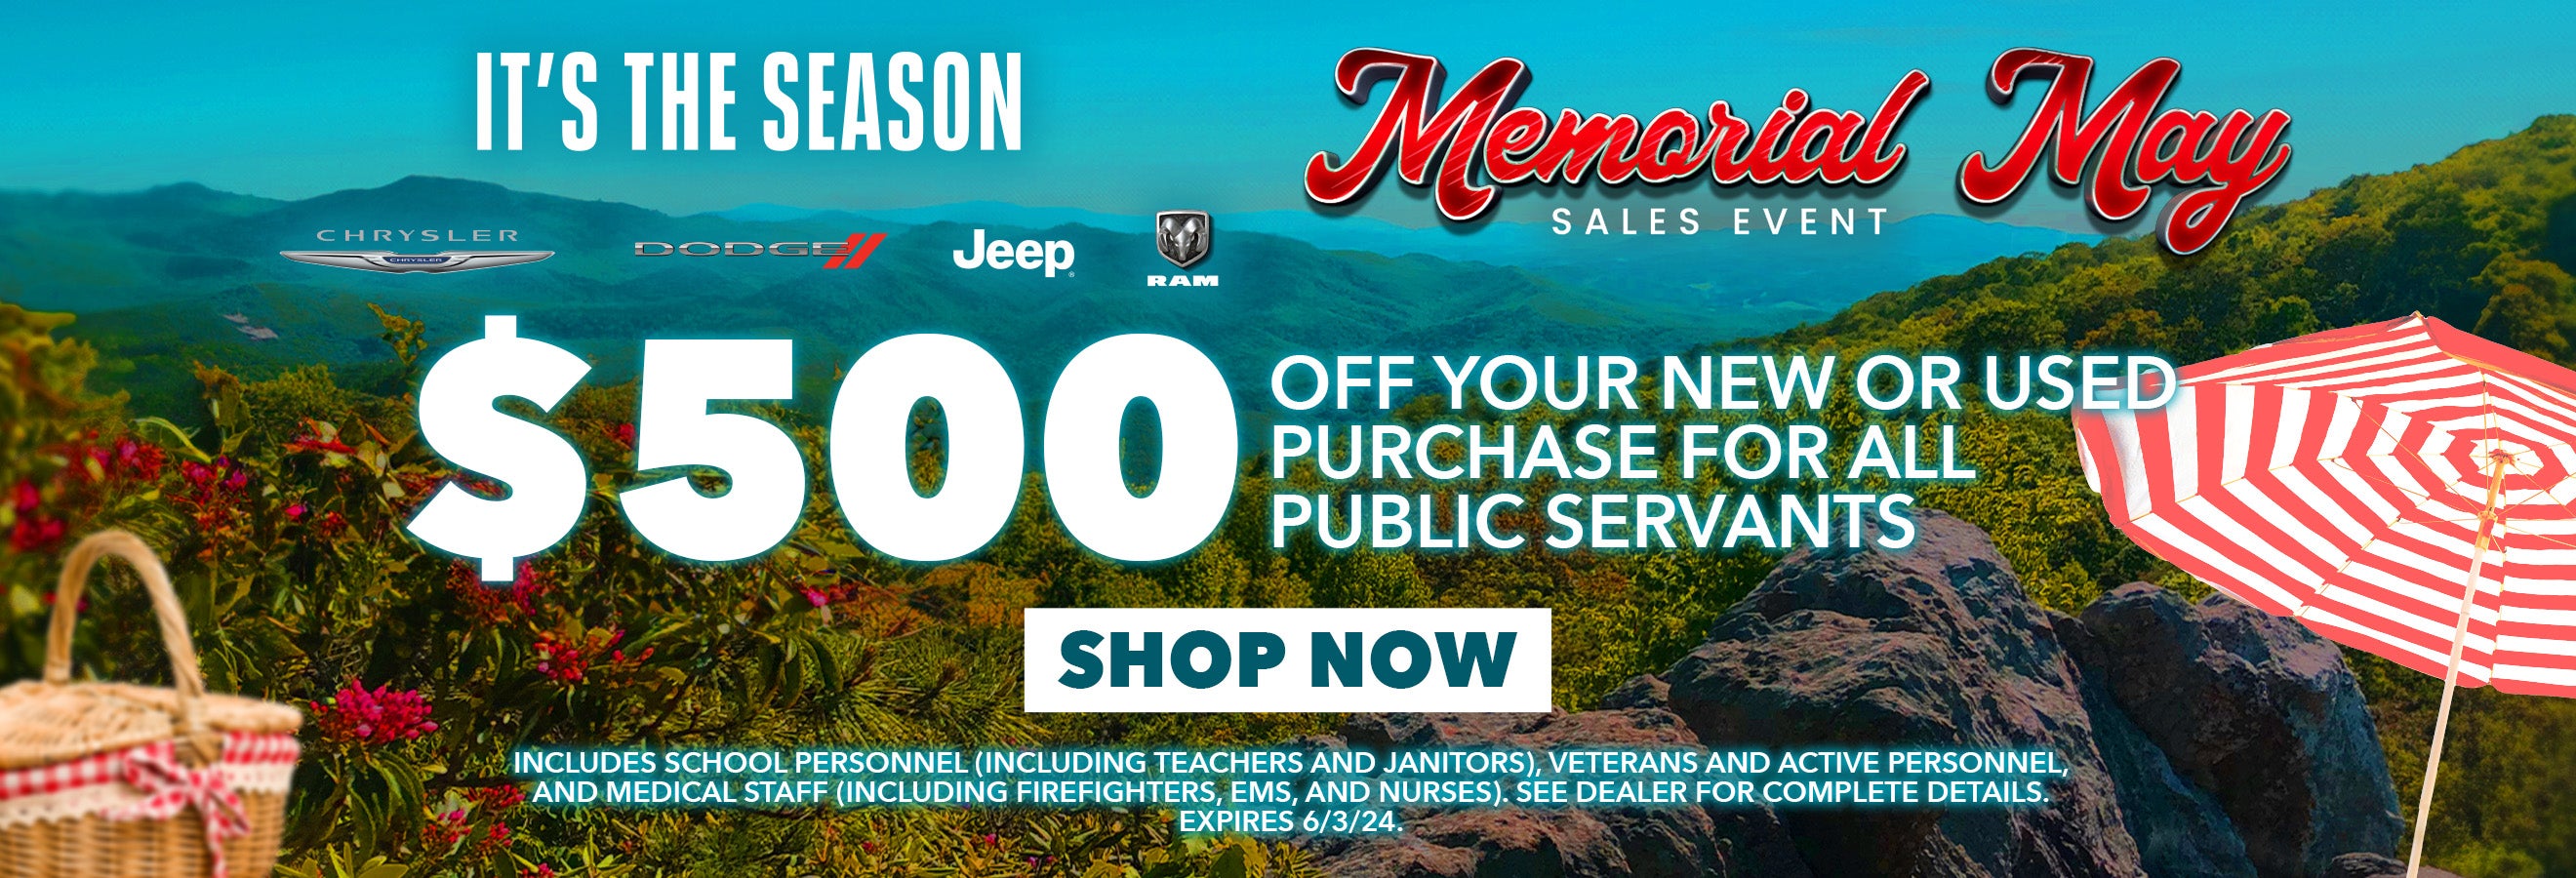 $500 off new or used for all public servants